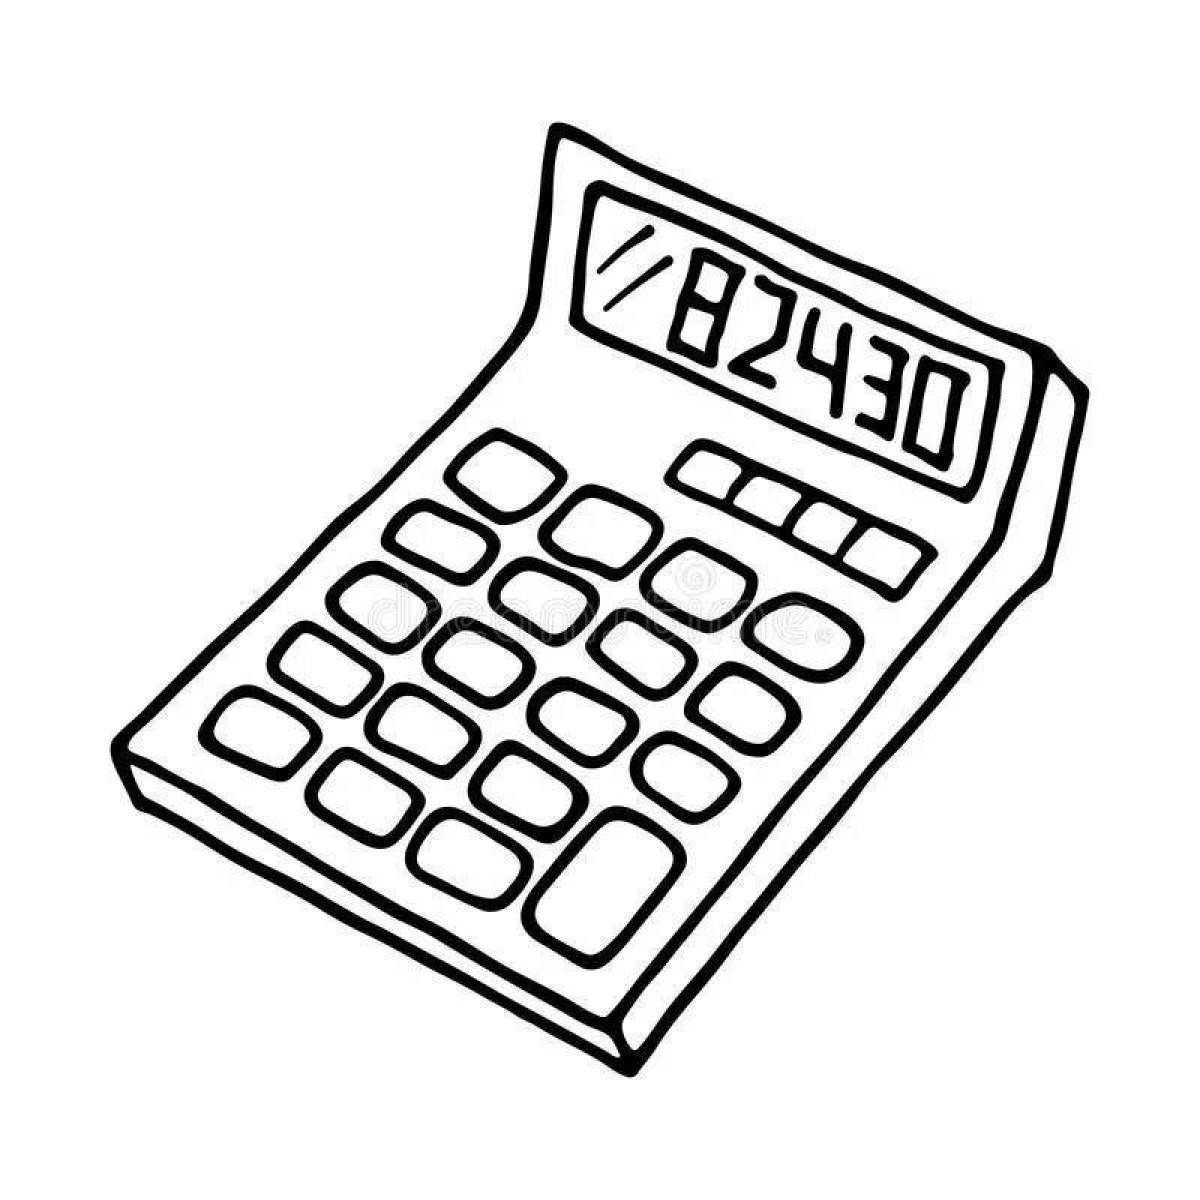 Playful calculator coloring page